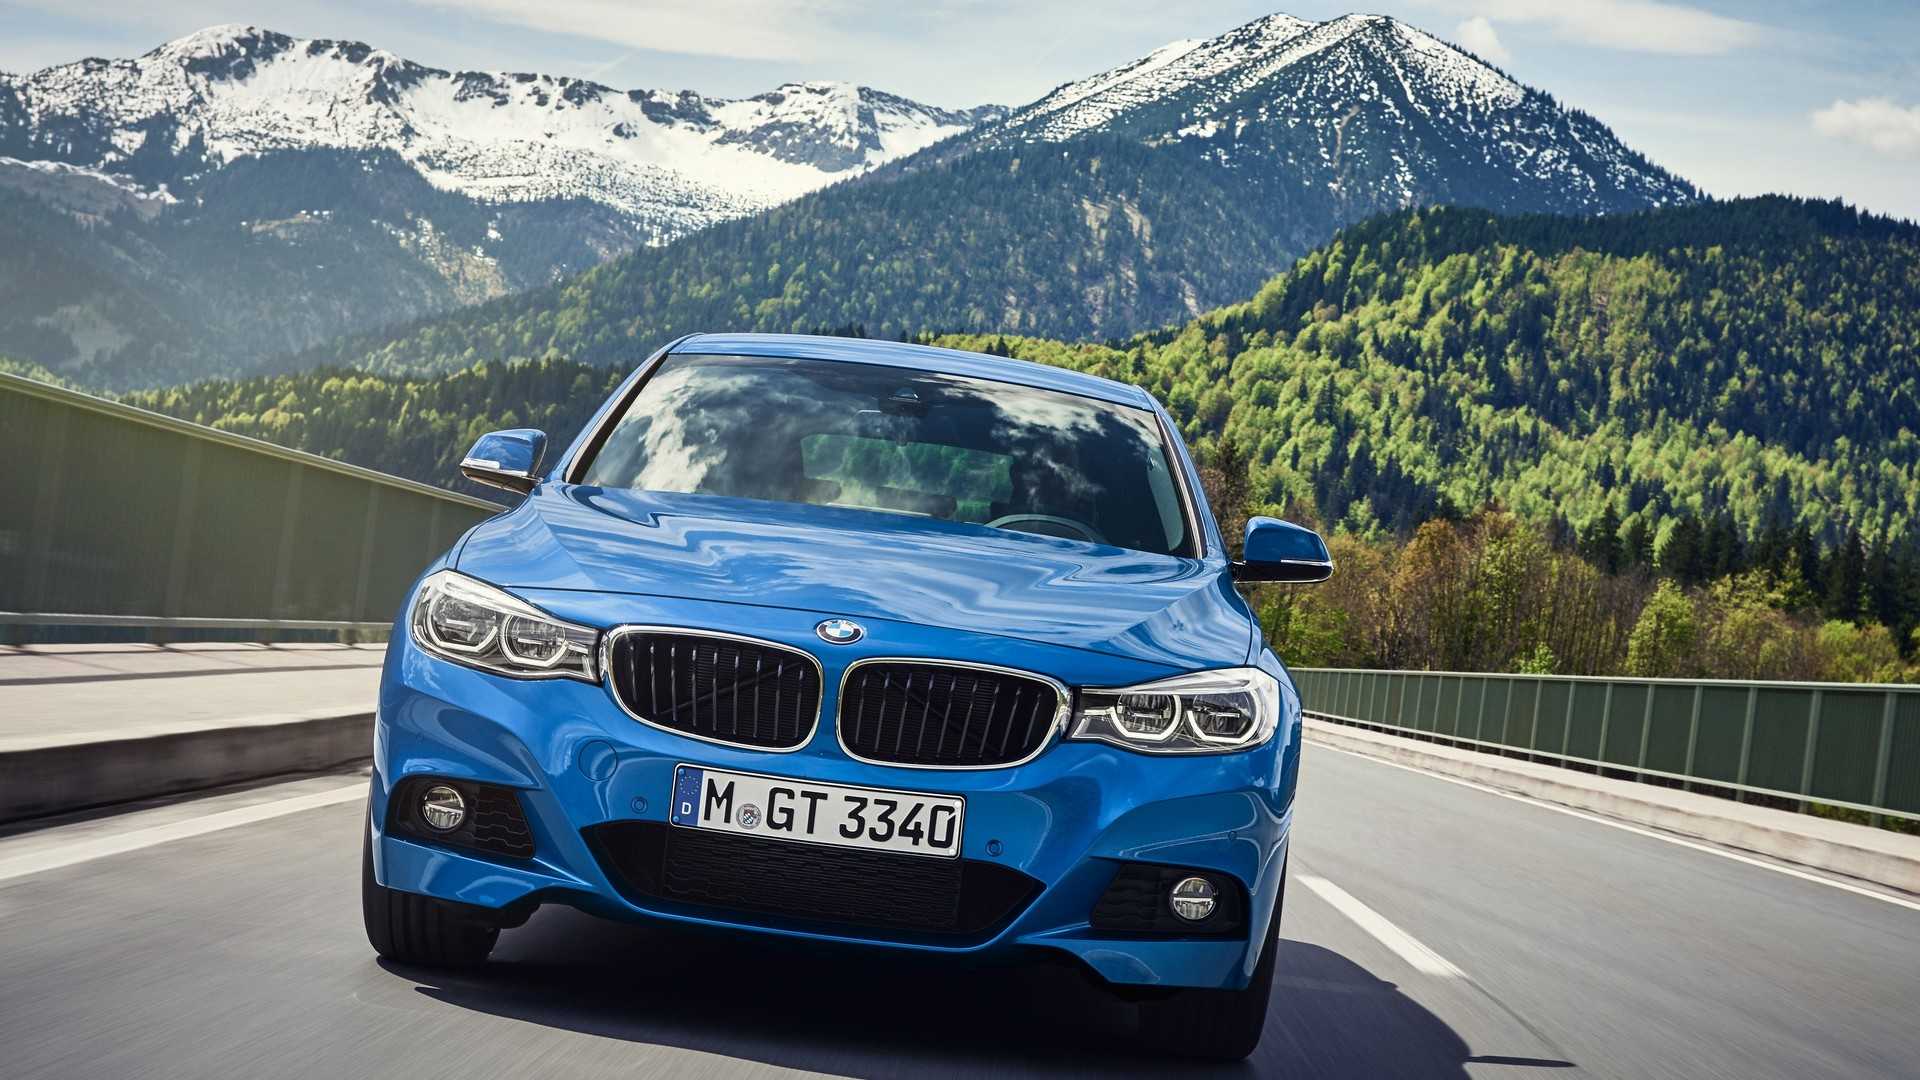 BMW 3 Series Gran Turismo Production Comes To An End